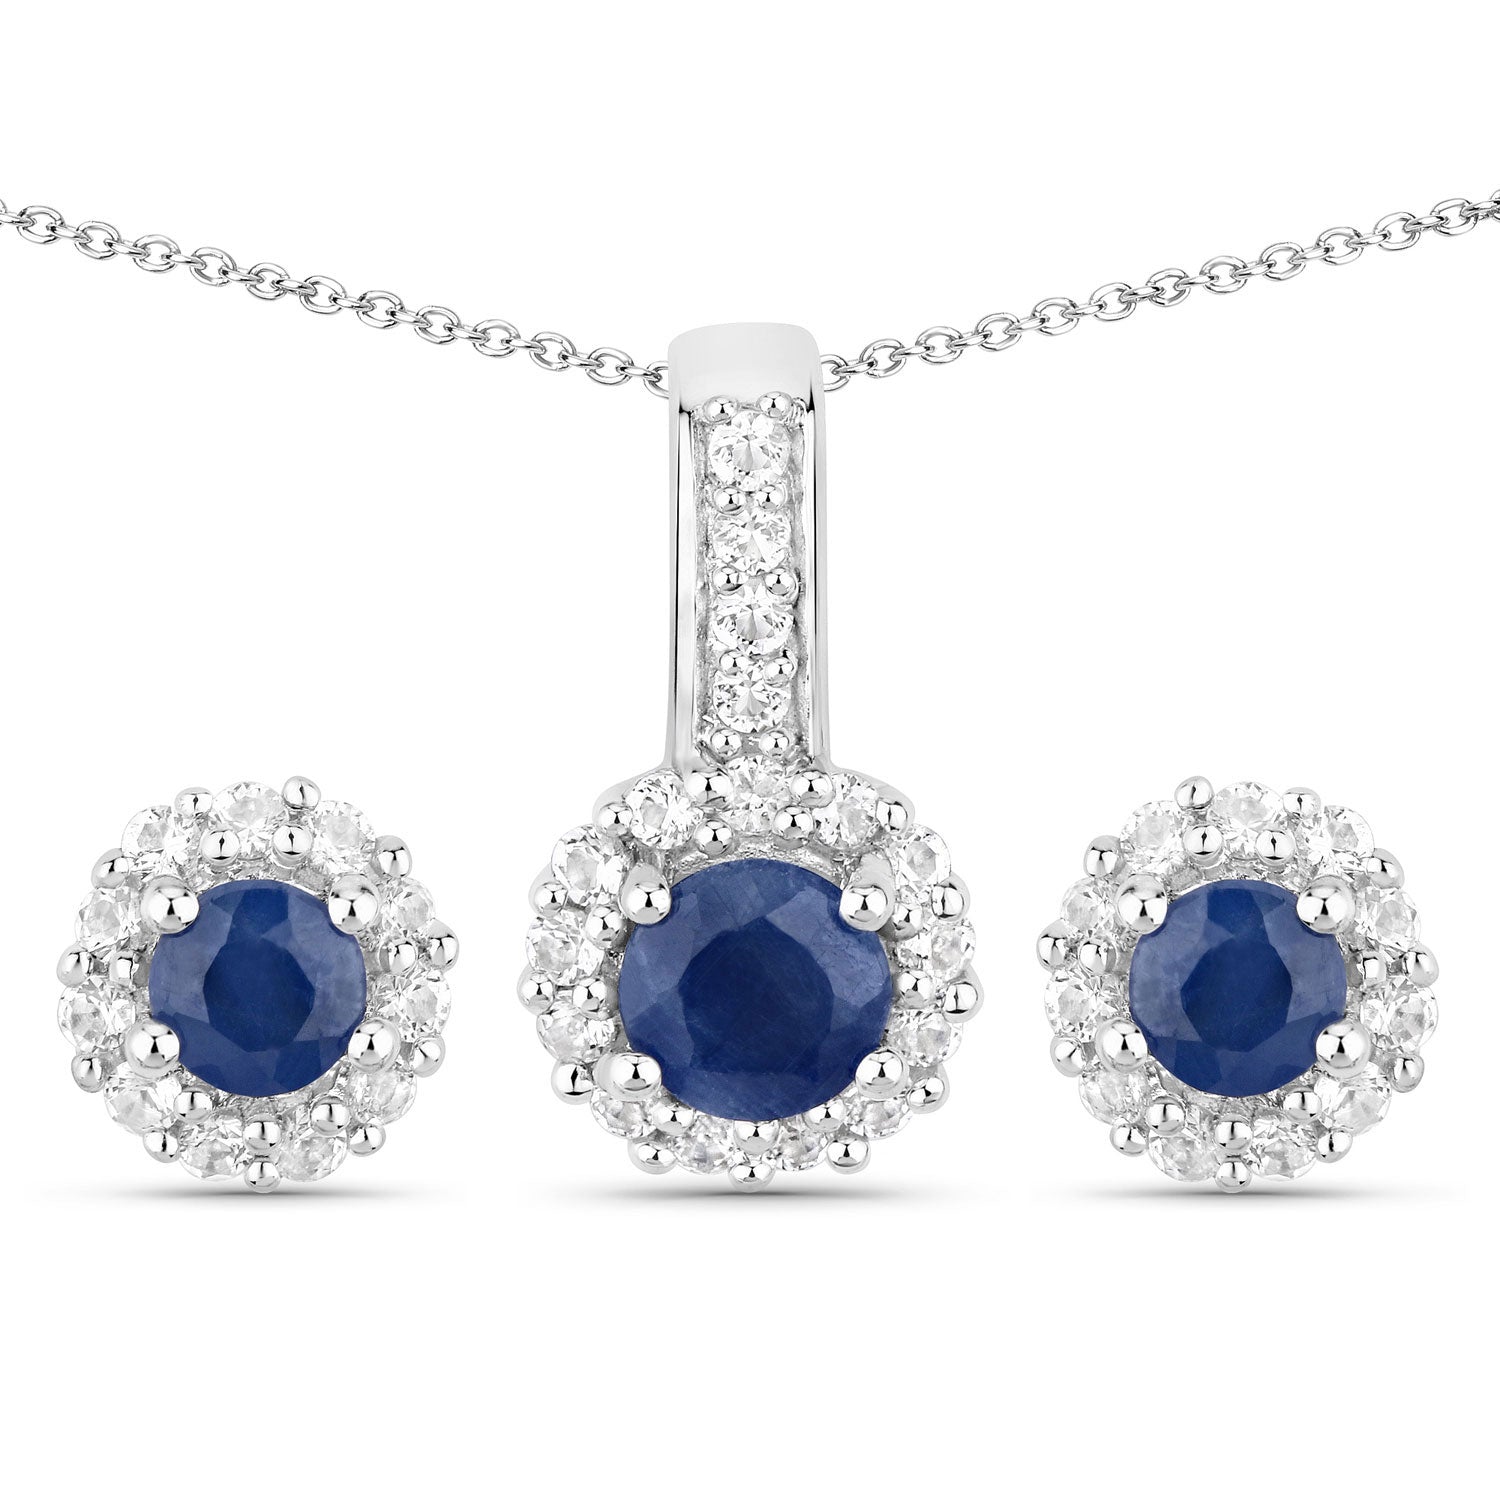 2.17 Carat Genuine Blue Sapphire and White Topaz .925 Sterling Silver Jewelry Set